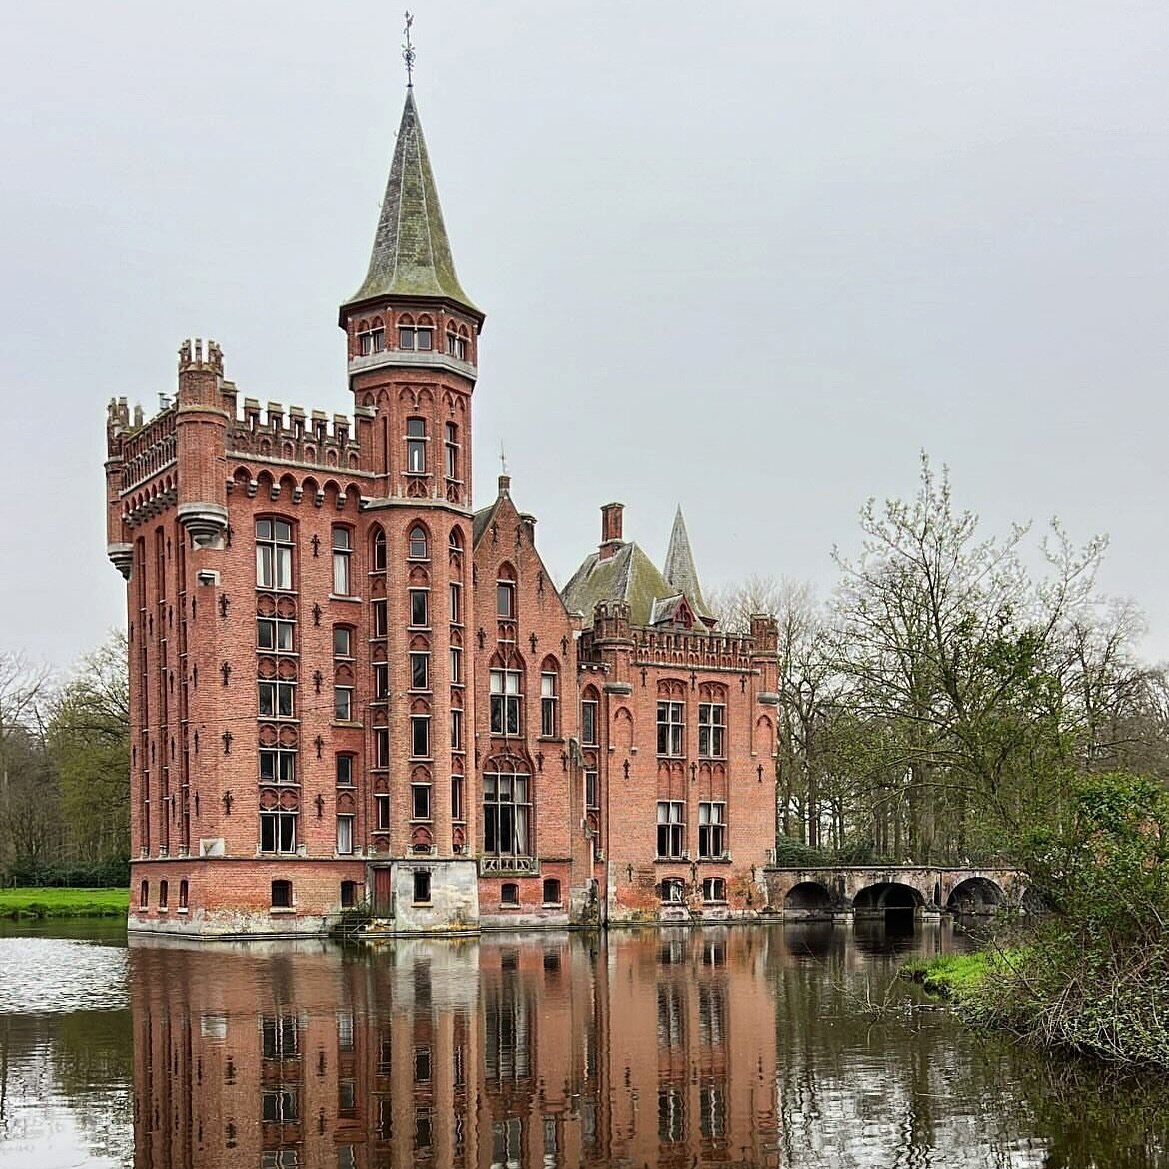 Springtime Castle vibes!

Castle Ten Berghe awaits!  Just outside Bruges, Belgium. 🇧🇪 Book your stay in our historic castle &amp; enjoy stunning views as spring unfolds. (link in bio) #castlelife #chateau #castle